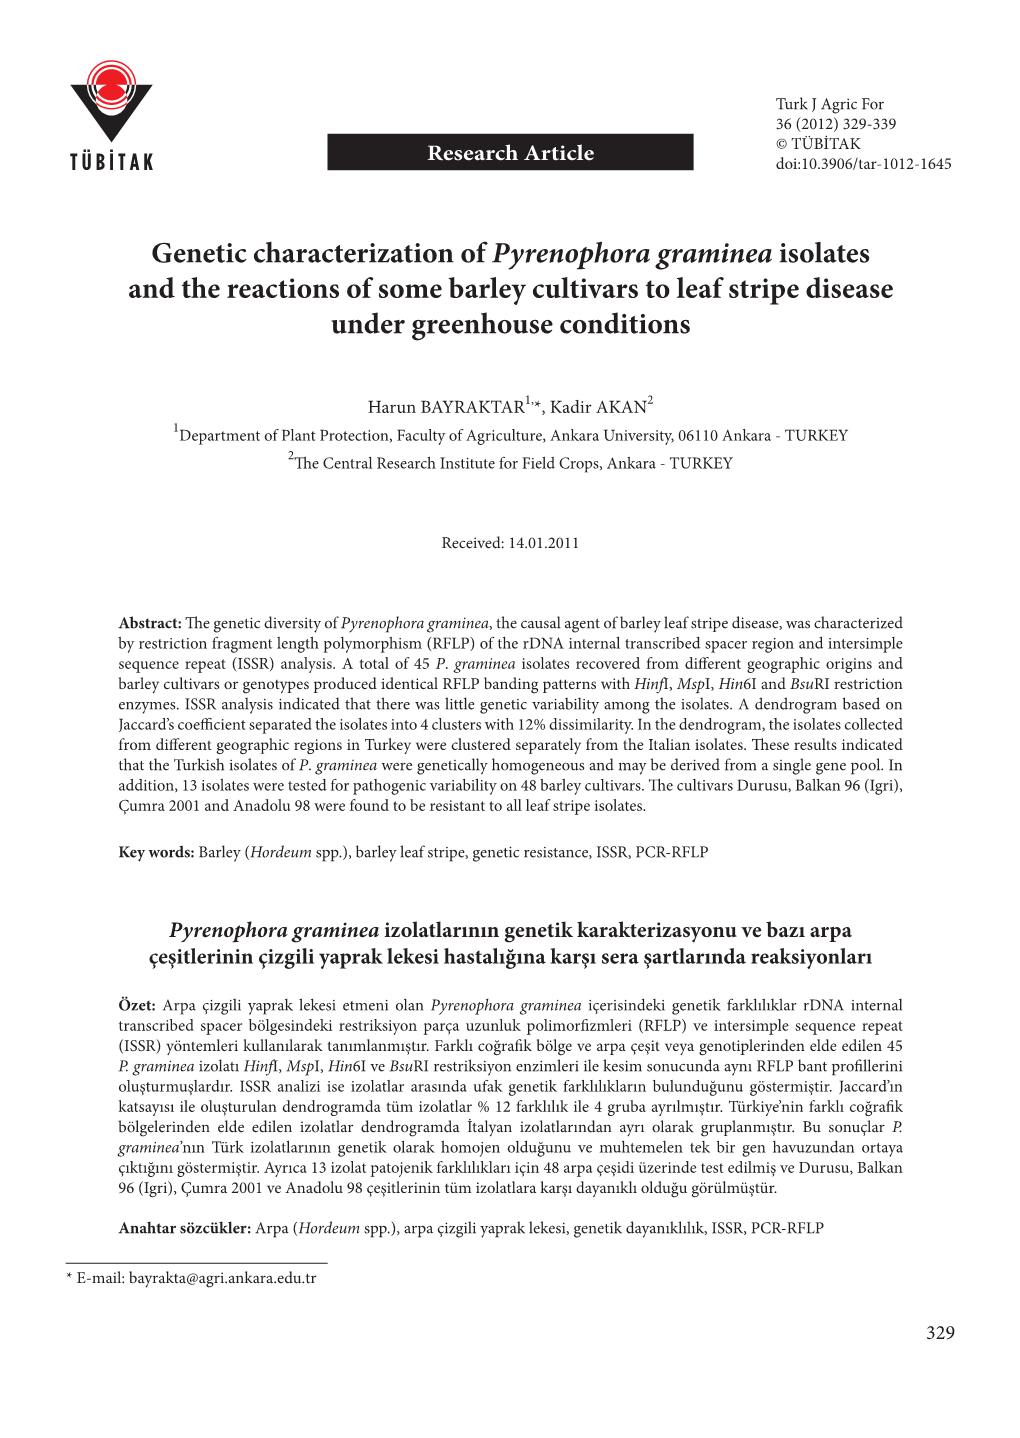 Genetic Characterization of Pyrenophora Graminea Isolates and the Reactions of Some Barley Cultivars to Leaf Stripe Disease Under Greenhouse Conditions